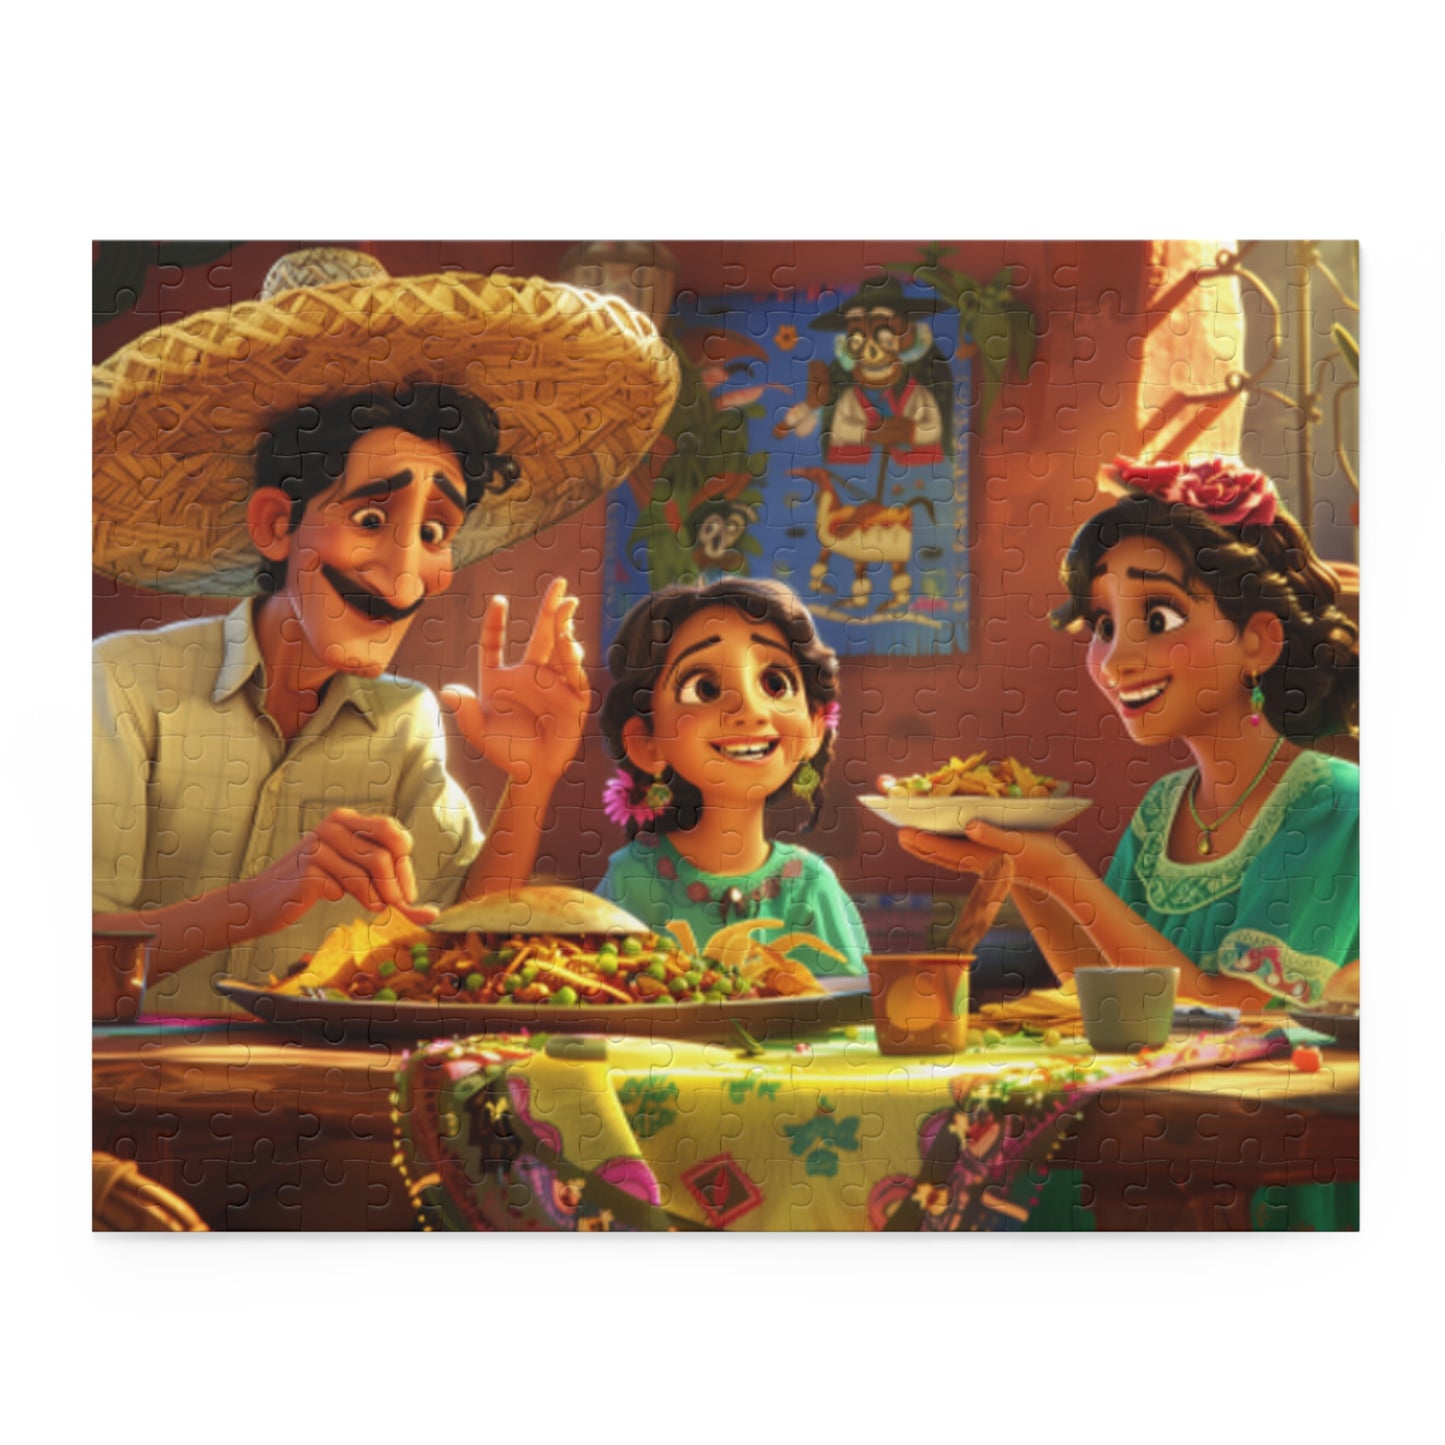 Mexican Happy Family Sitting Retro Art Jigsaw Puzzle Adult Birthday Business Jigsaw Puzzle Gift for Him Funny Humorous Indoor Outdoor Game Gift For Her Online-3